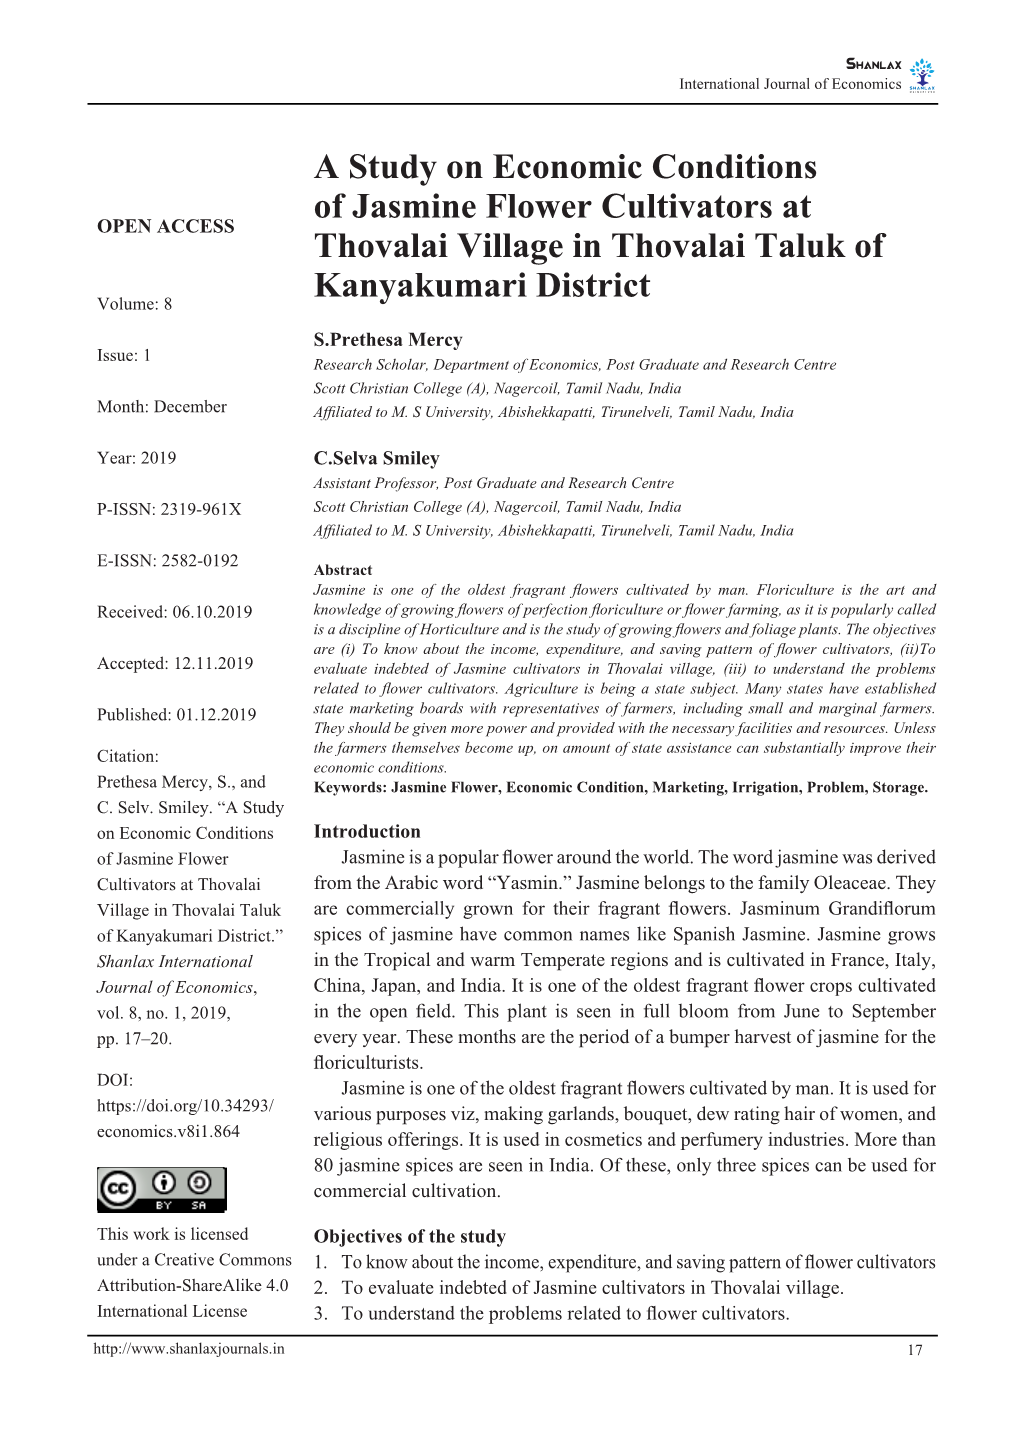 A Study on Economic Conditions of Jasmine Flower Cultivators at OPEN ACCESS Thovalai Village in Thovalai Taluk Of